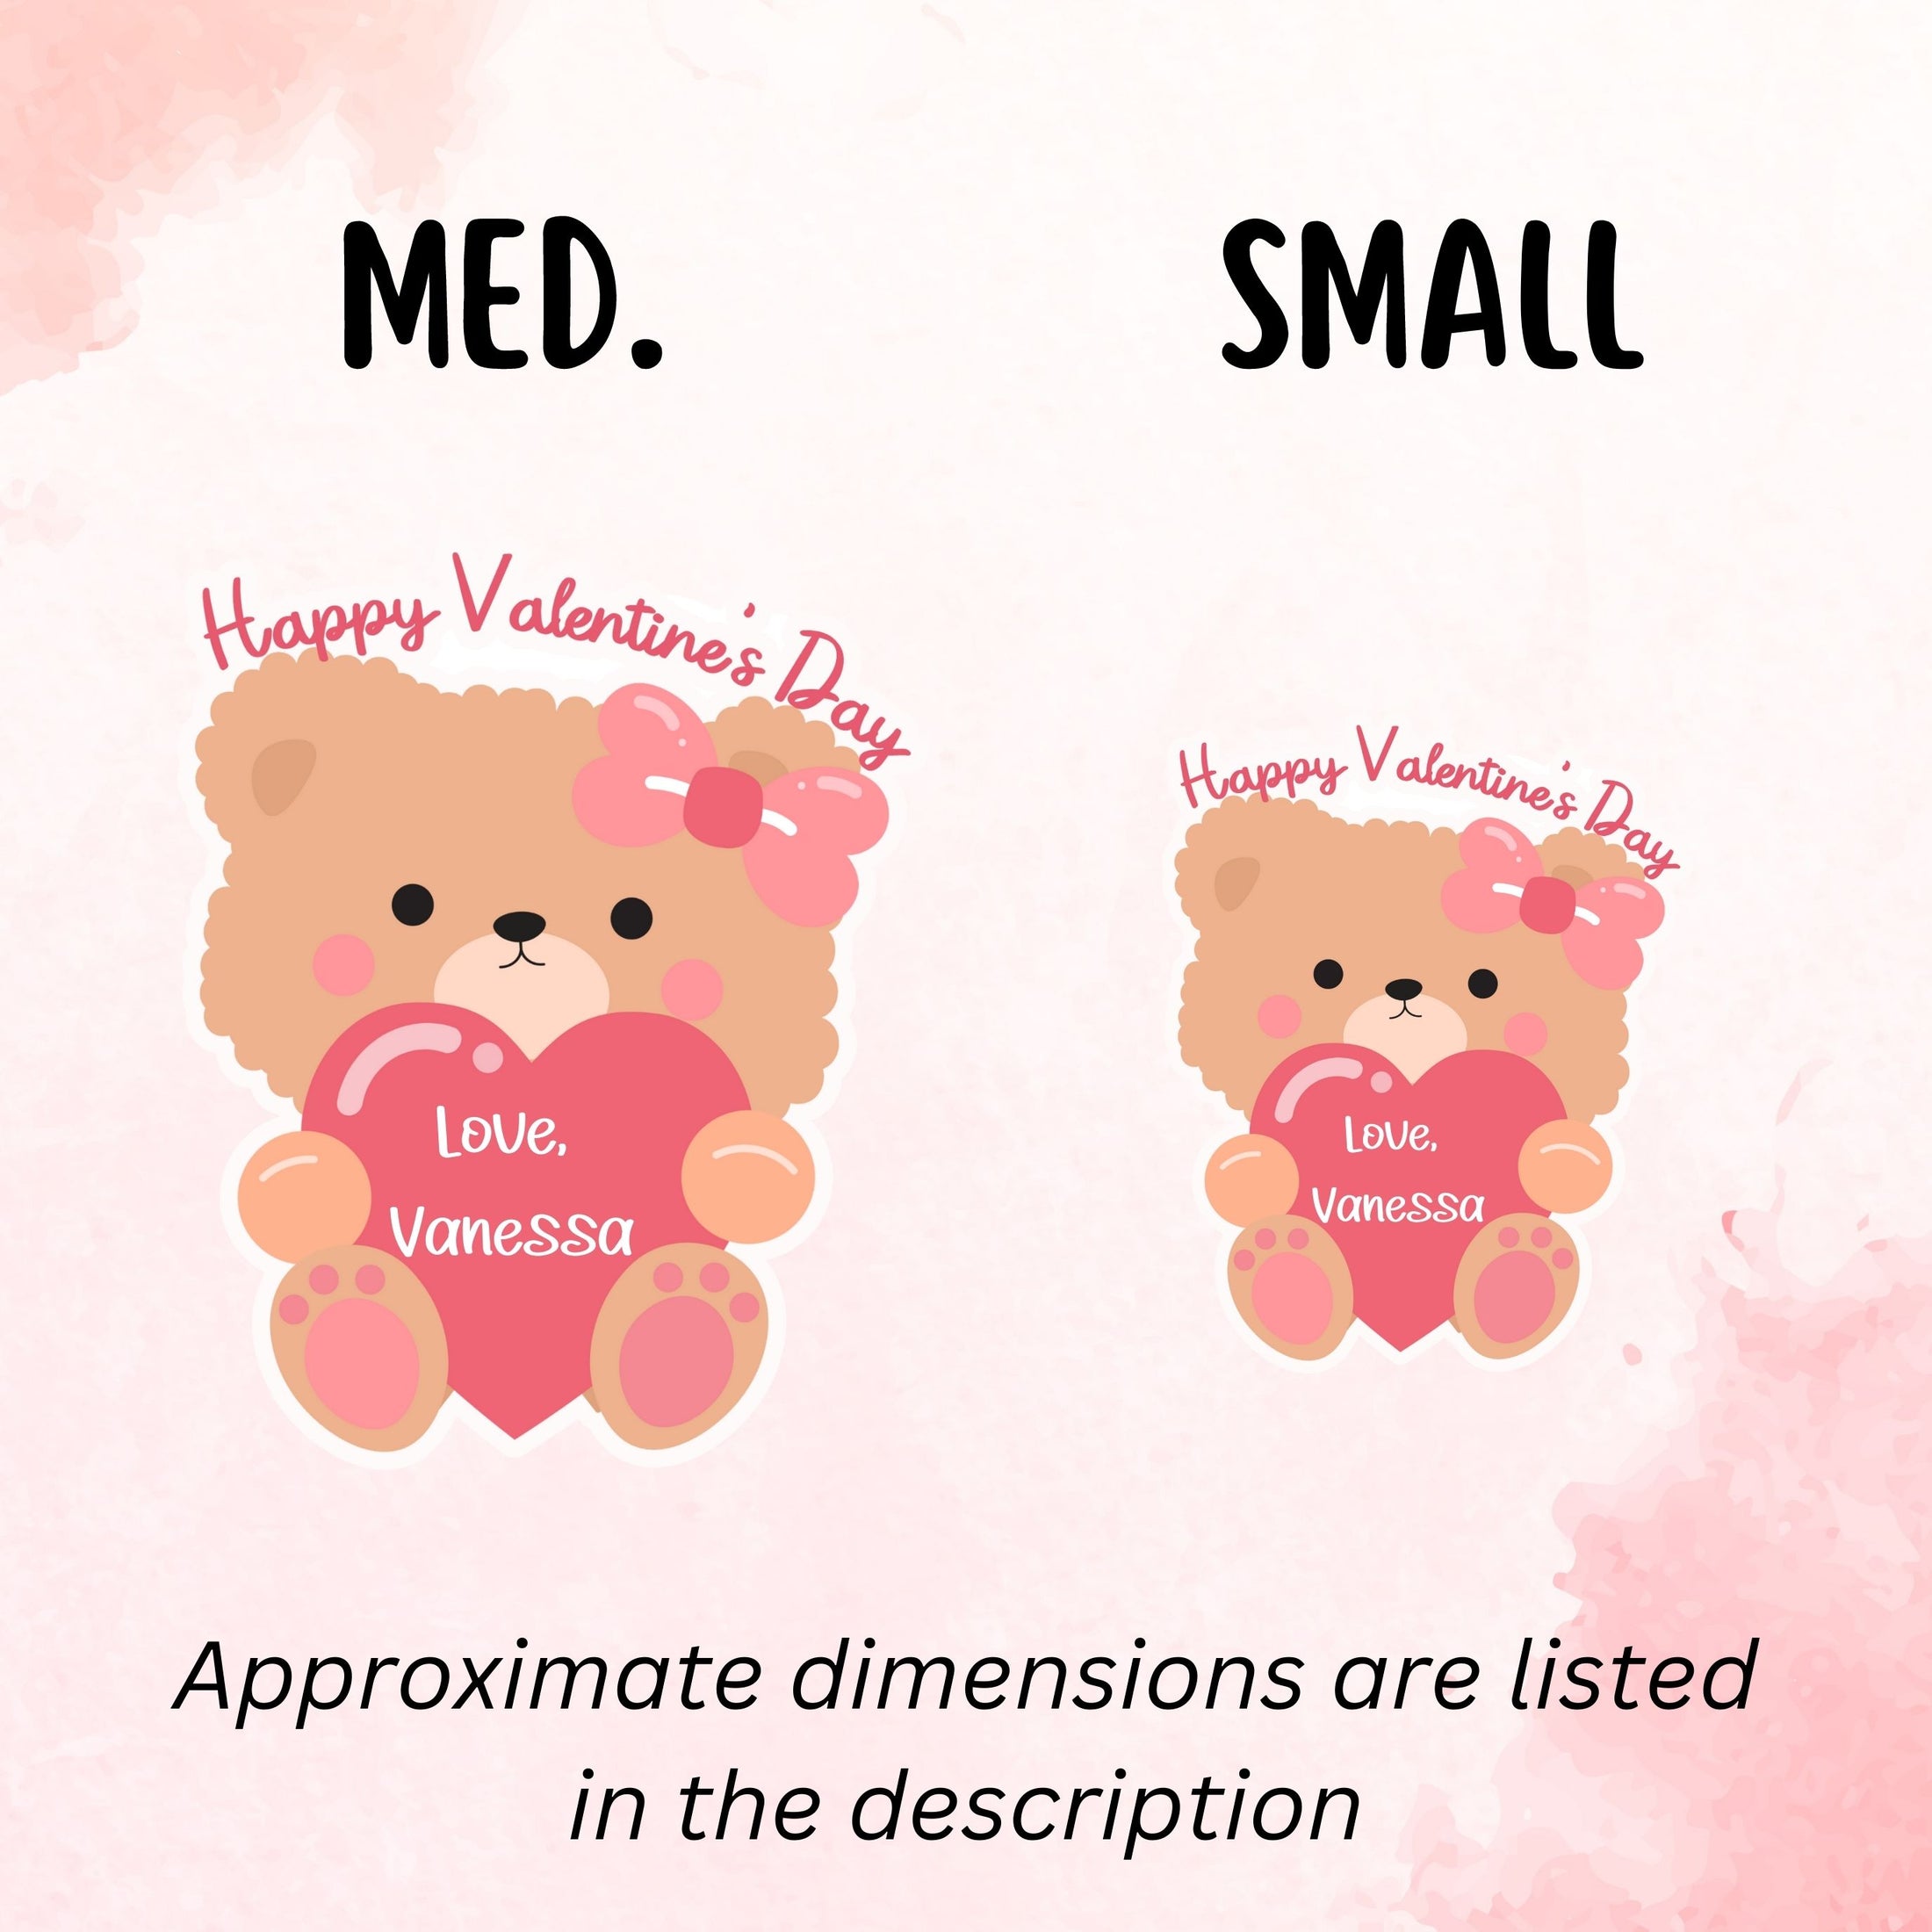 This image shows medium and small personalized valentine stickers next to each other as a size comparison.